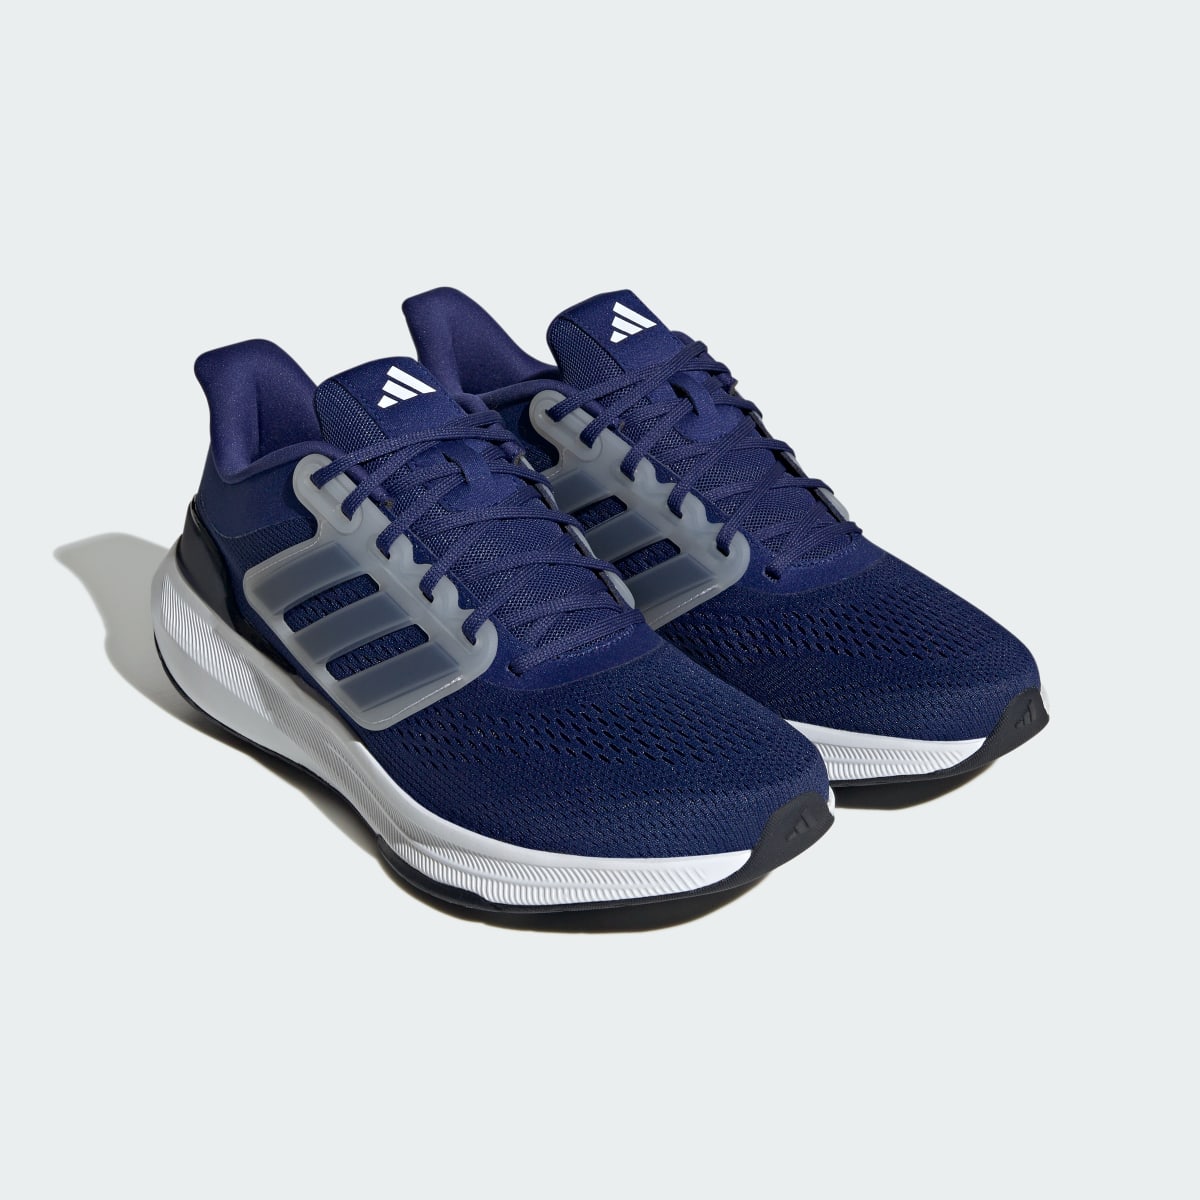 Adidas Ultrabounce Wide Shoes. 5